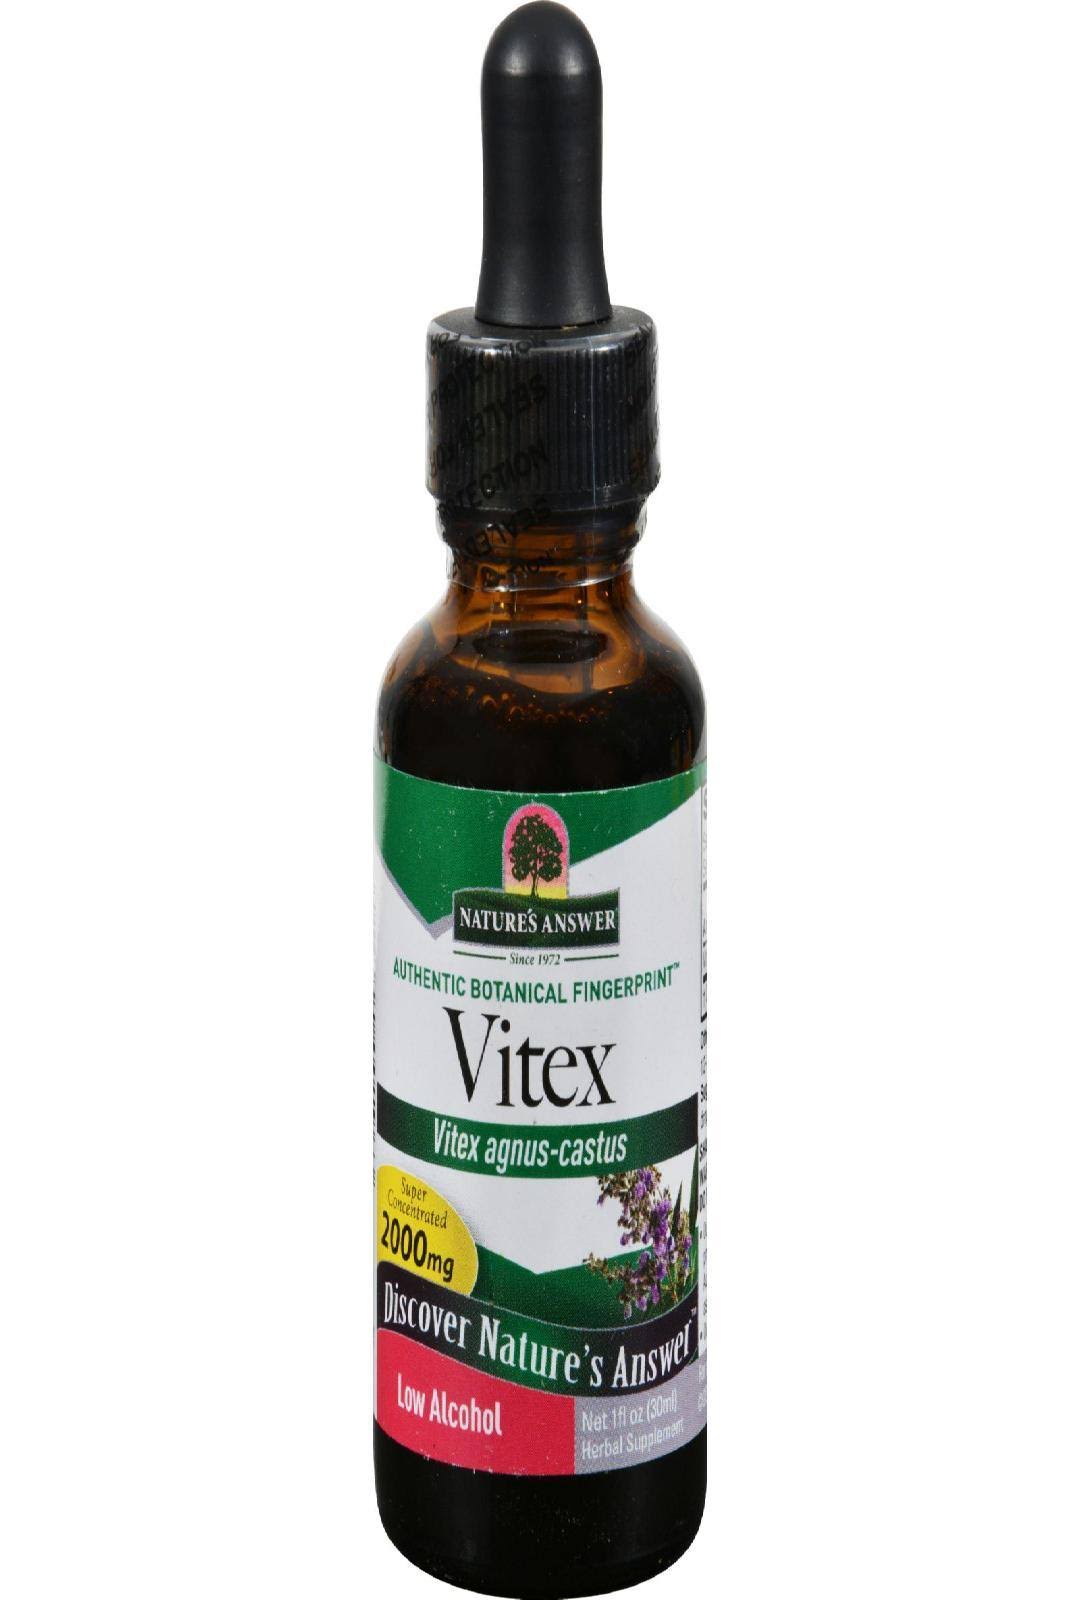 Nature's Answer Vitex Berry Organic Alcohol Fluid Extract - 2000mg